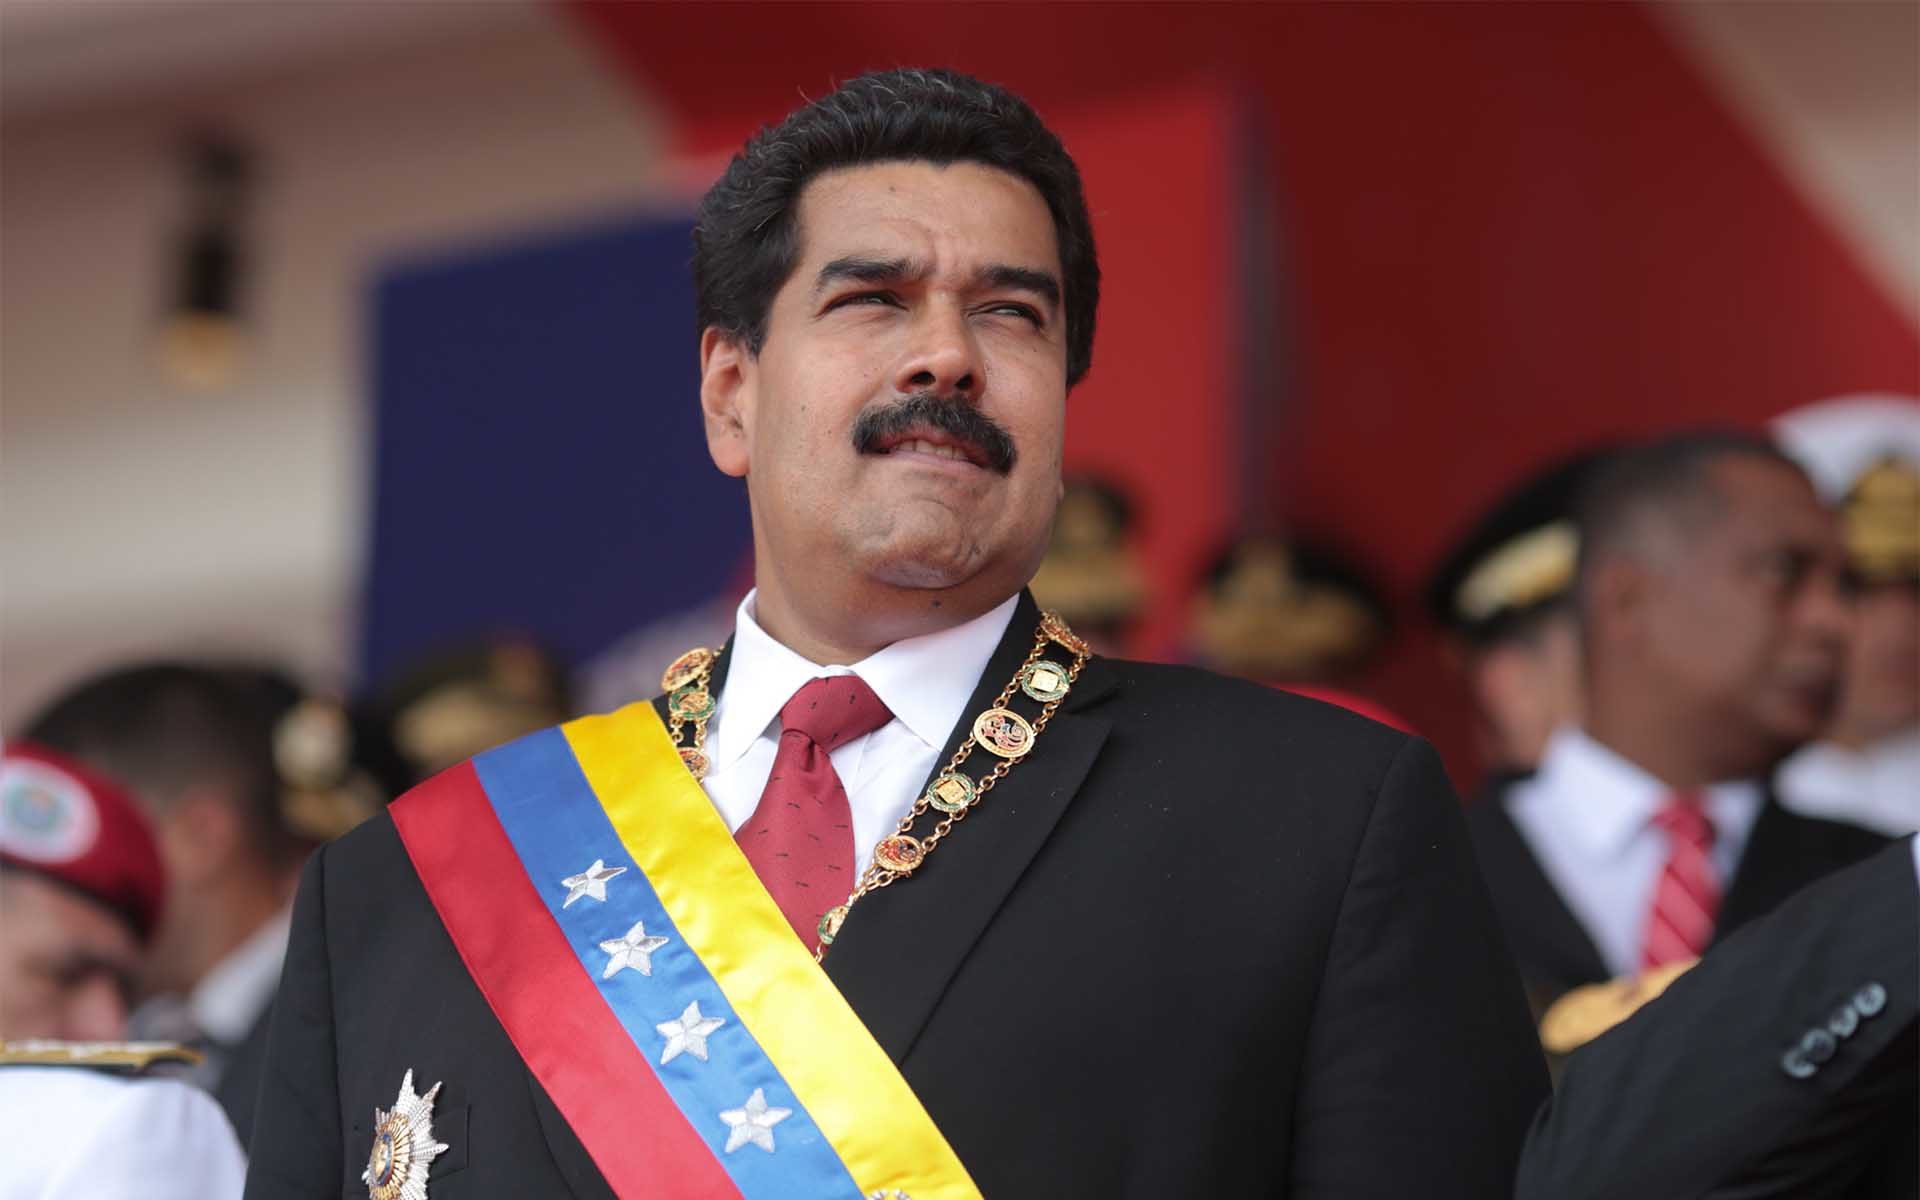 In July, Bitcoinist reported on Venezuelan Nicolás Maduro's efforts to see the Petro become his avowed 'Great Hope.'